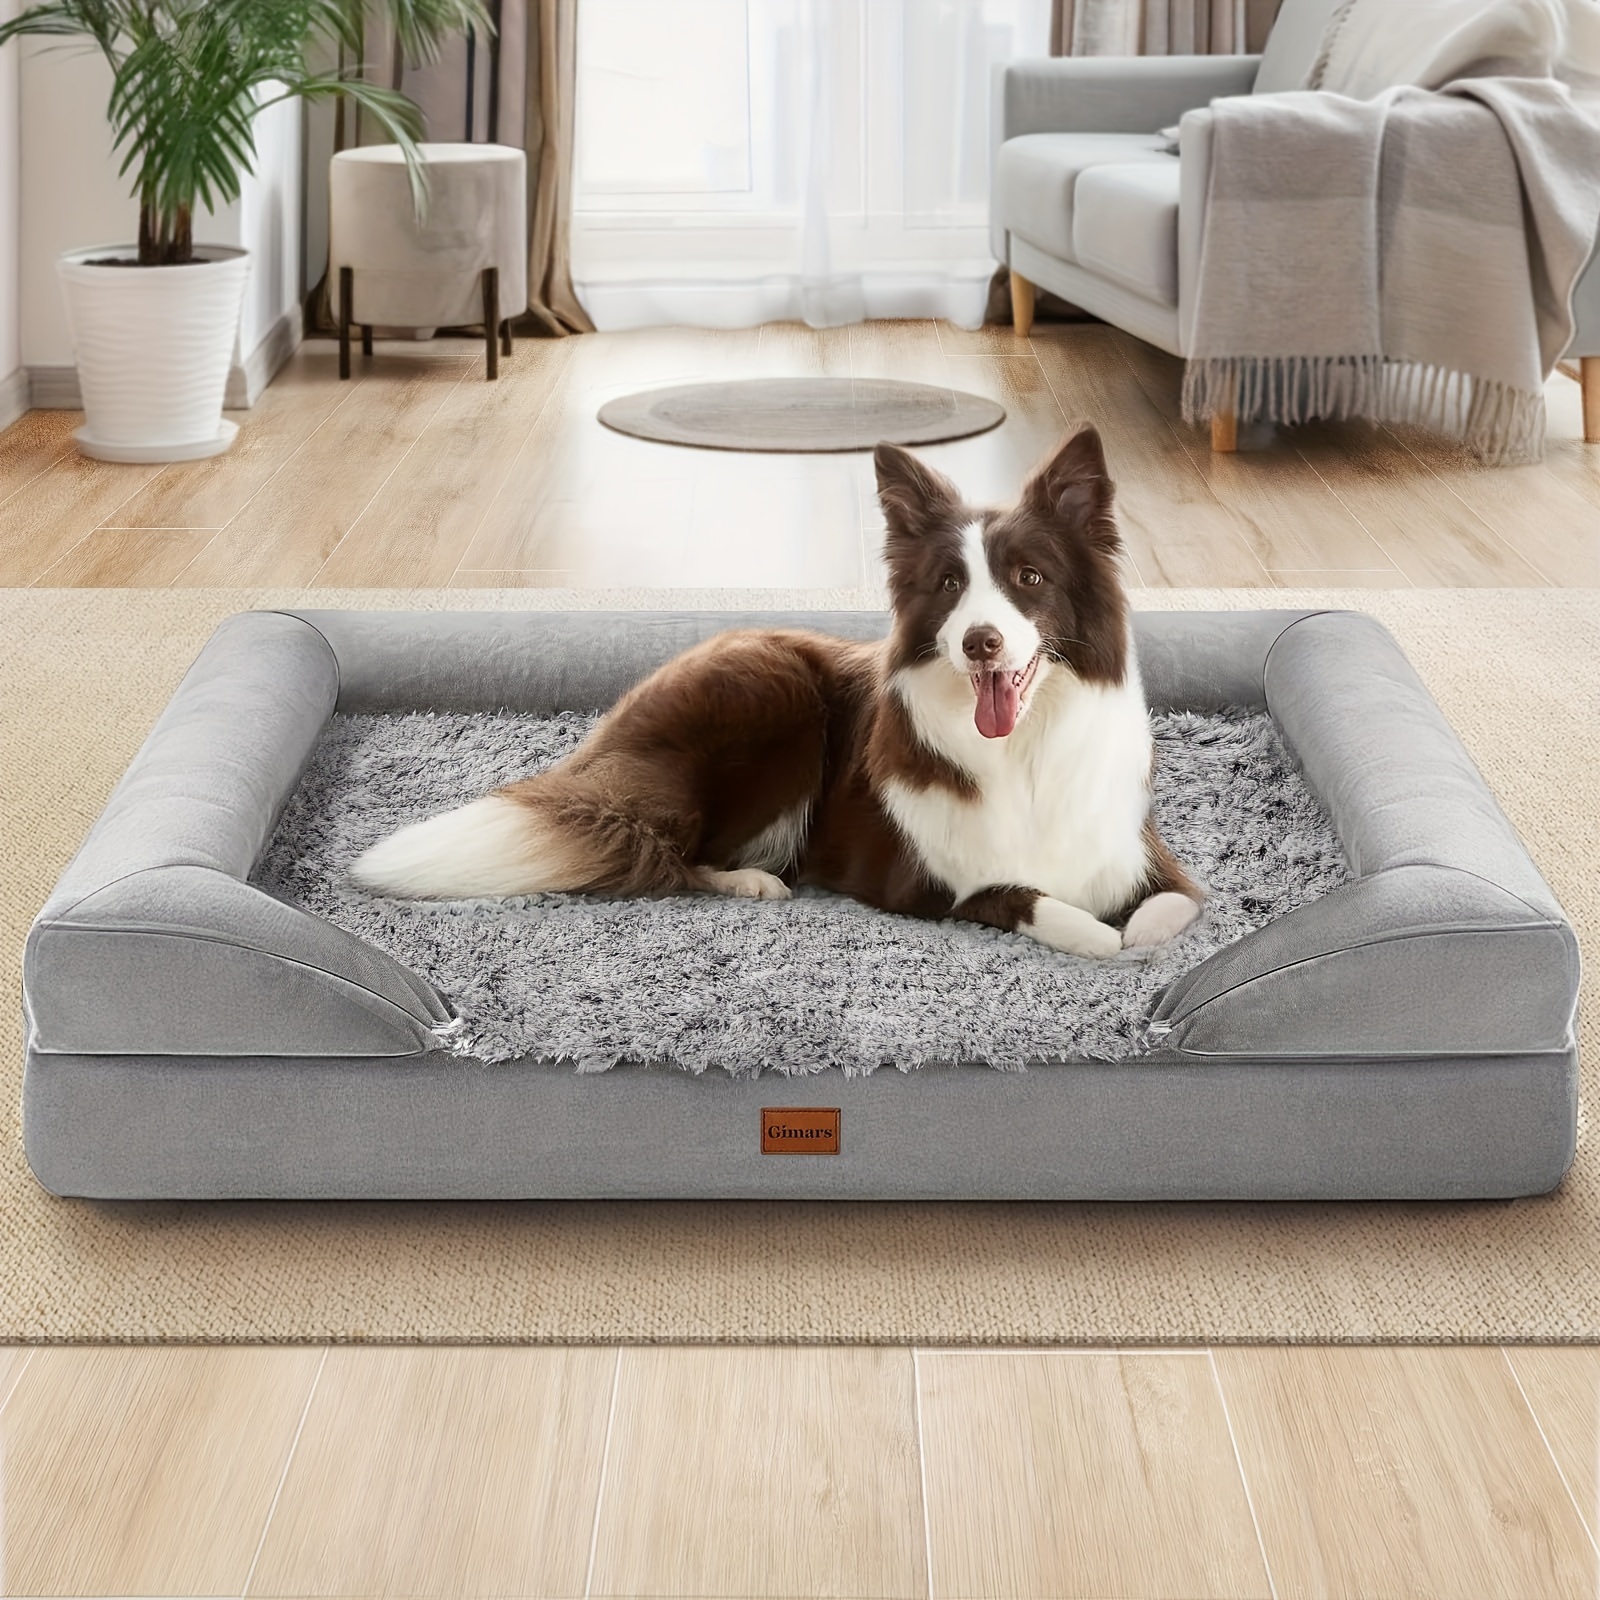 

Gimars Orthopedic Egg Foam Dog Beds For Large Dog, Waterproof High Supportive Bolsters With Removable Washable Cover For Large Medium Small & Aging Dogs, Medium